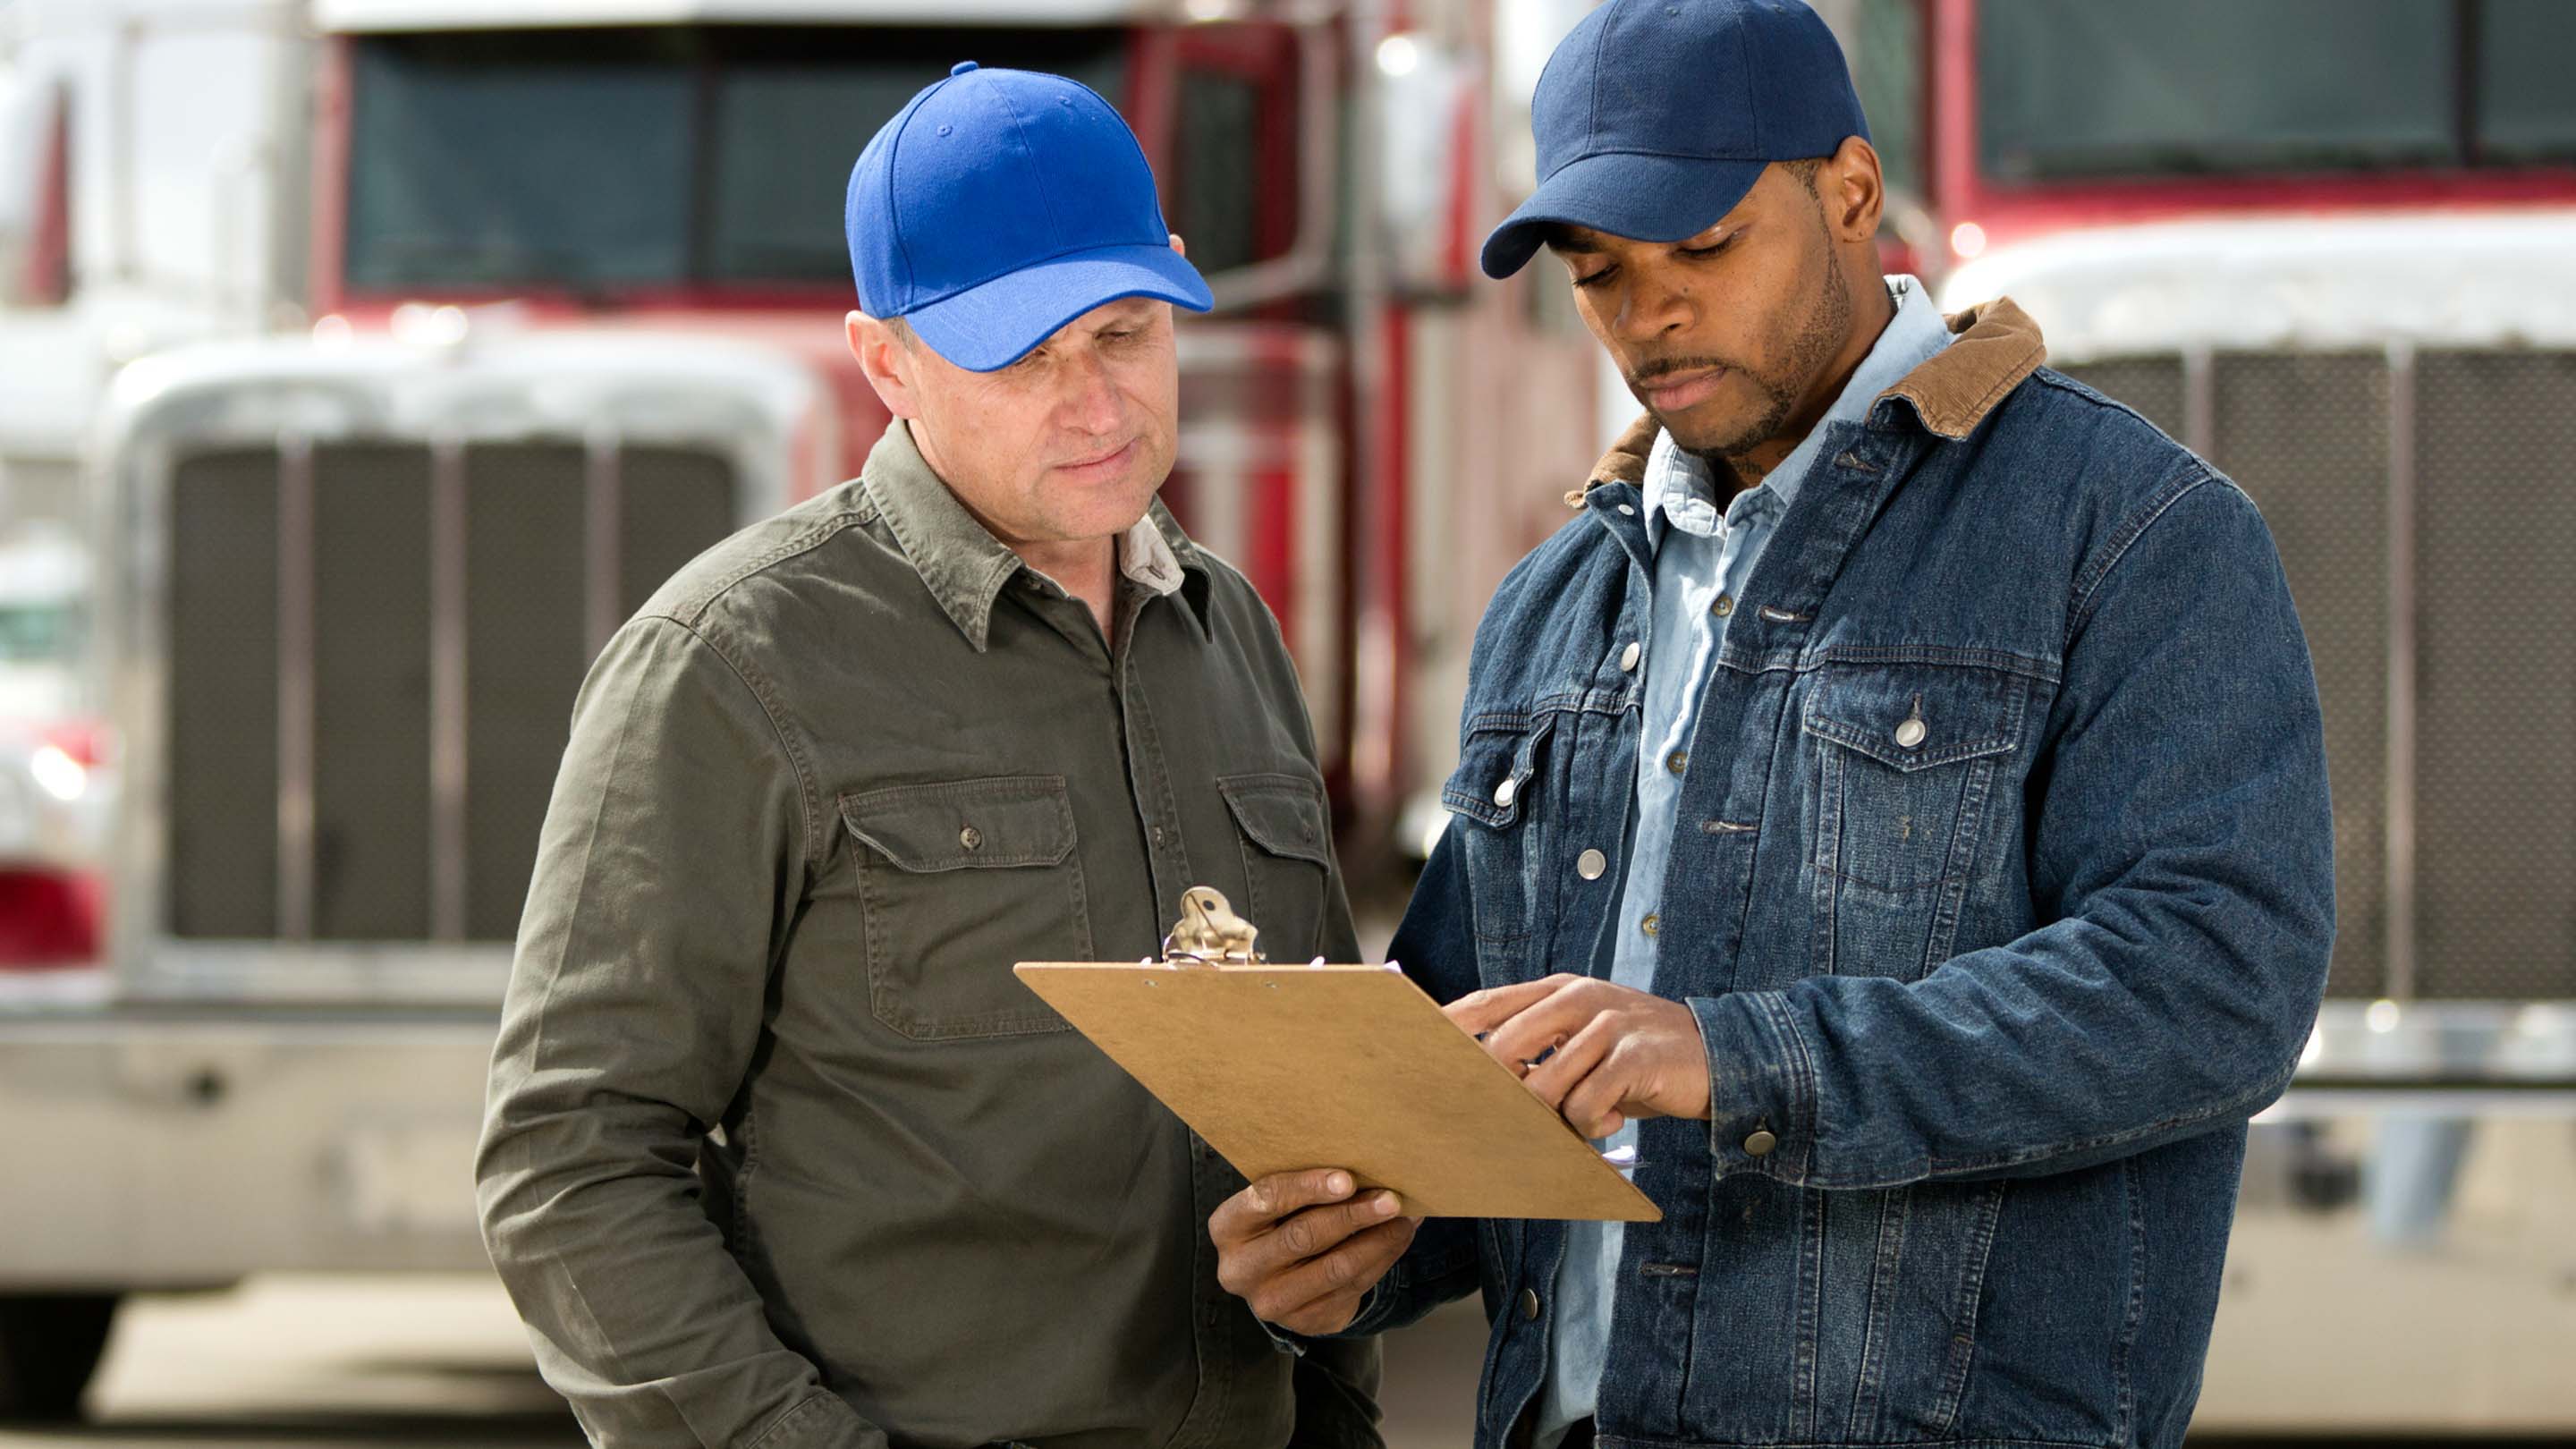 Two people looking at clipboard in front of two trucks